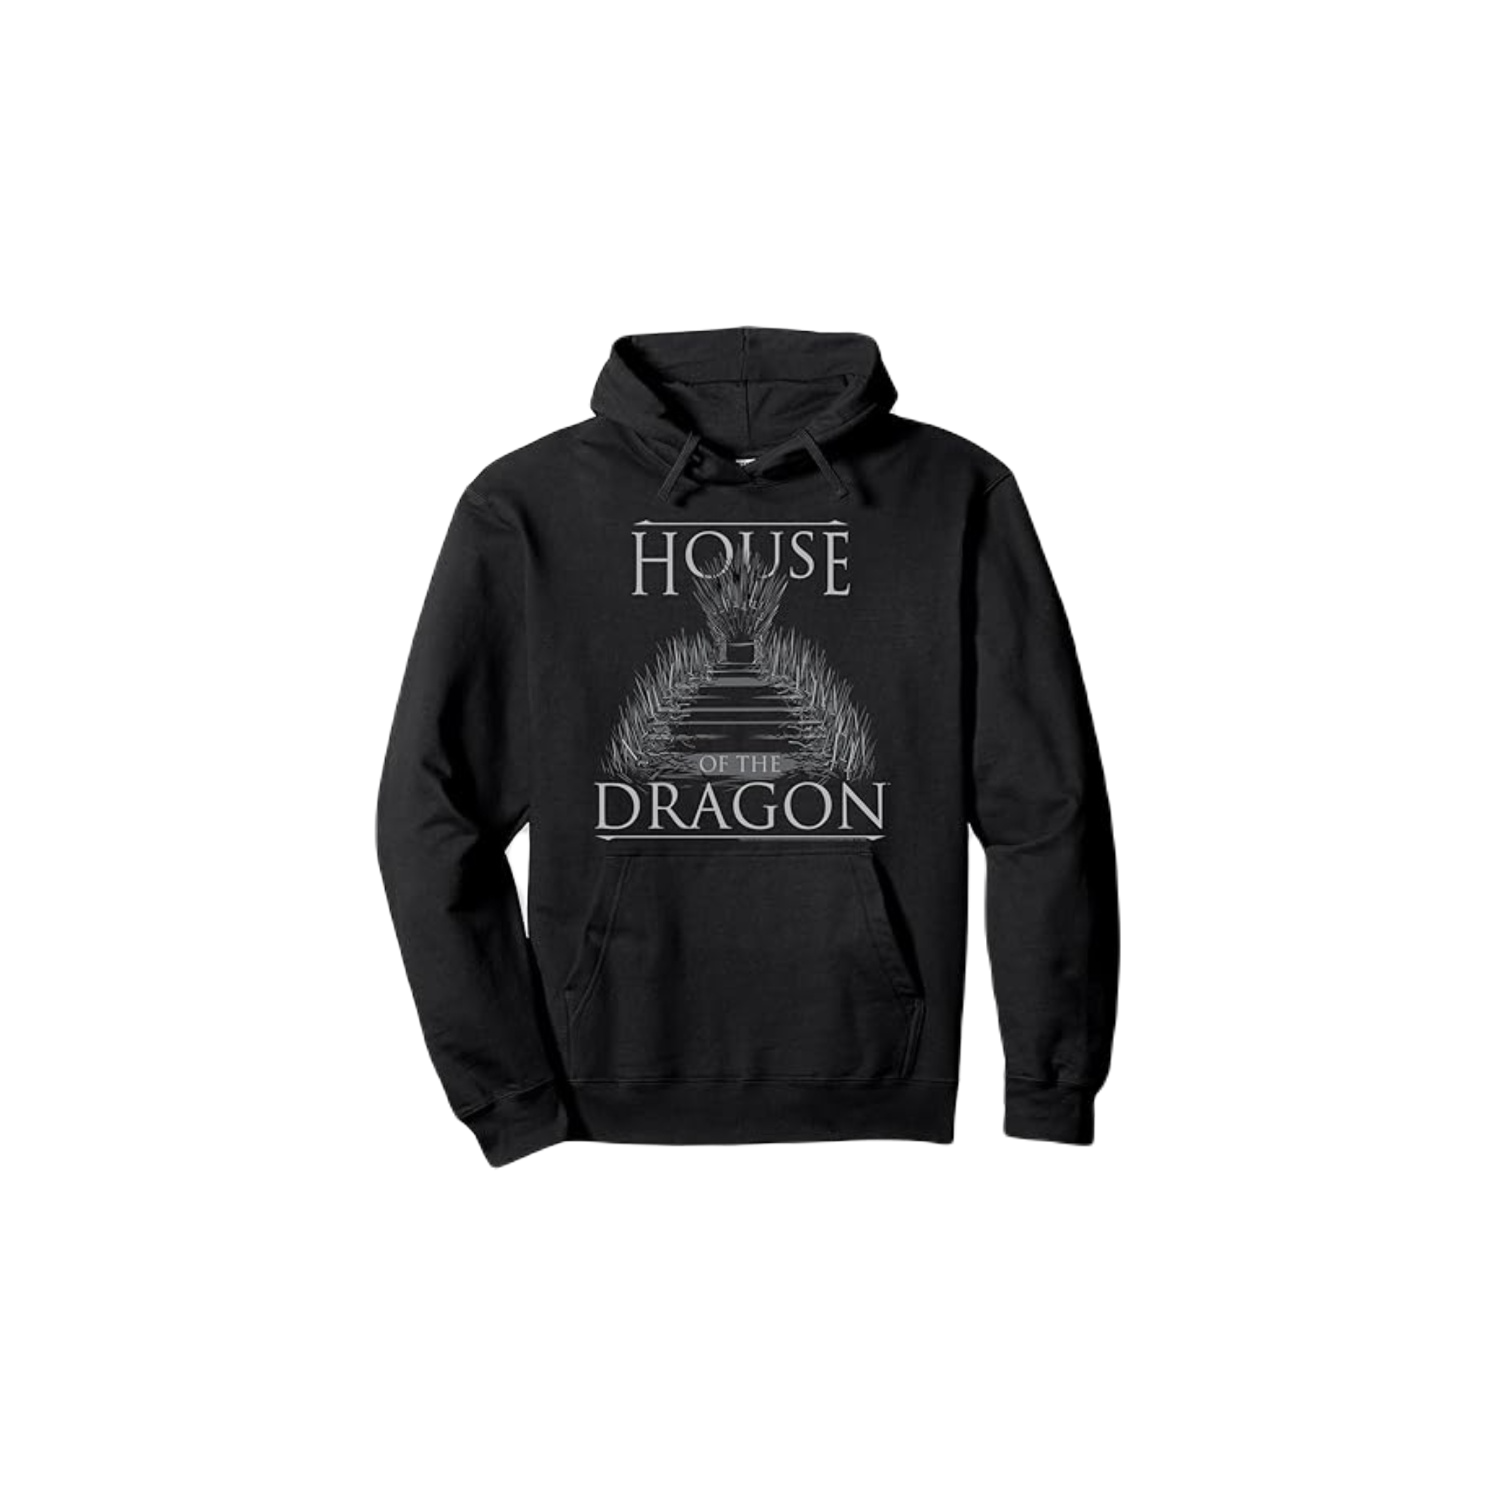 The Iron Throne Pull Over Hoodies